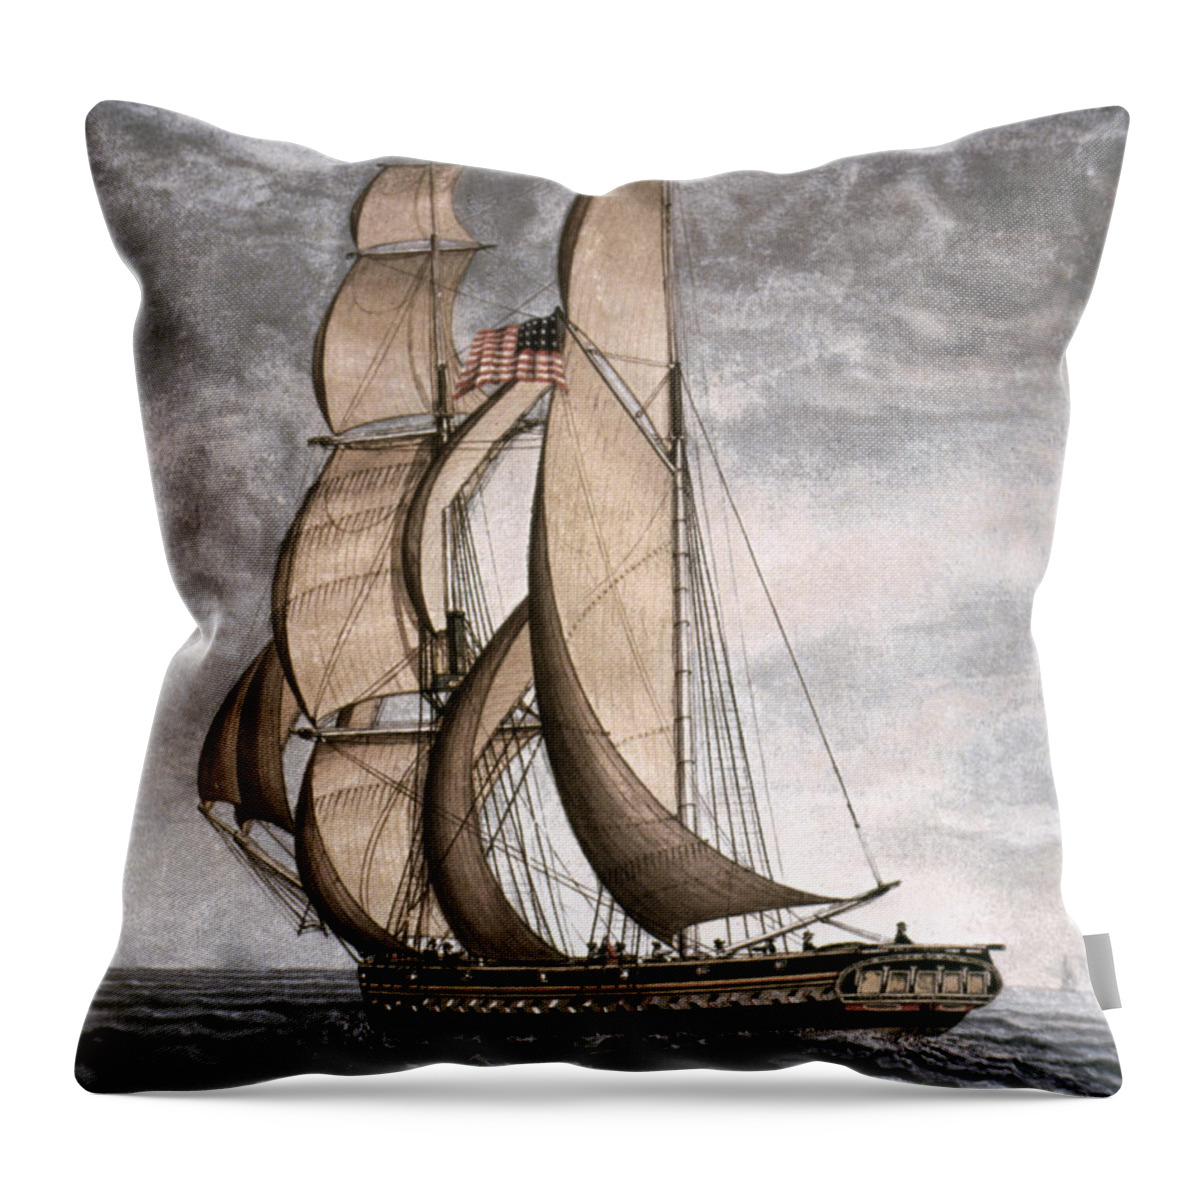 1816 Throw Pillow featuring the painting Yacht, 1816 by Granger